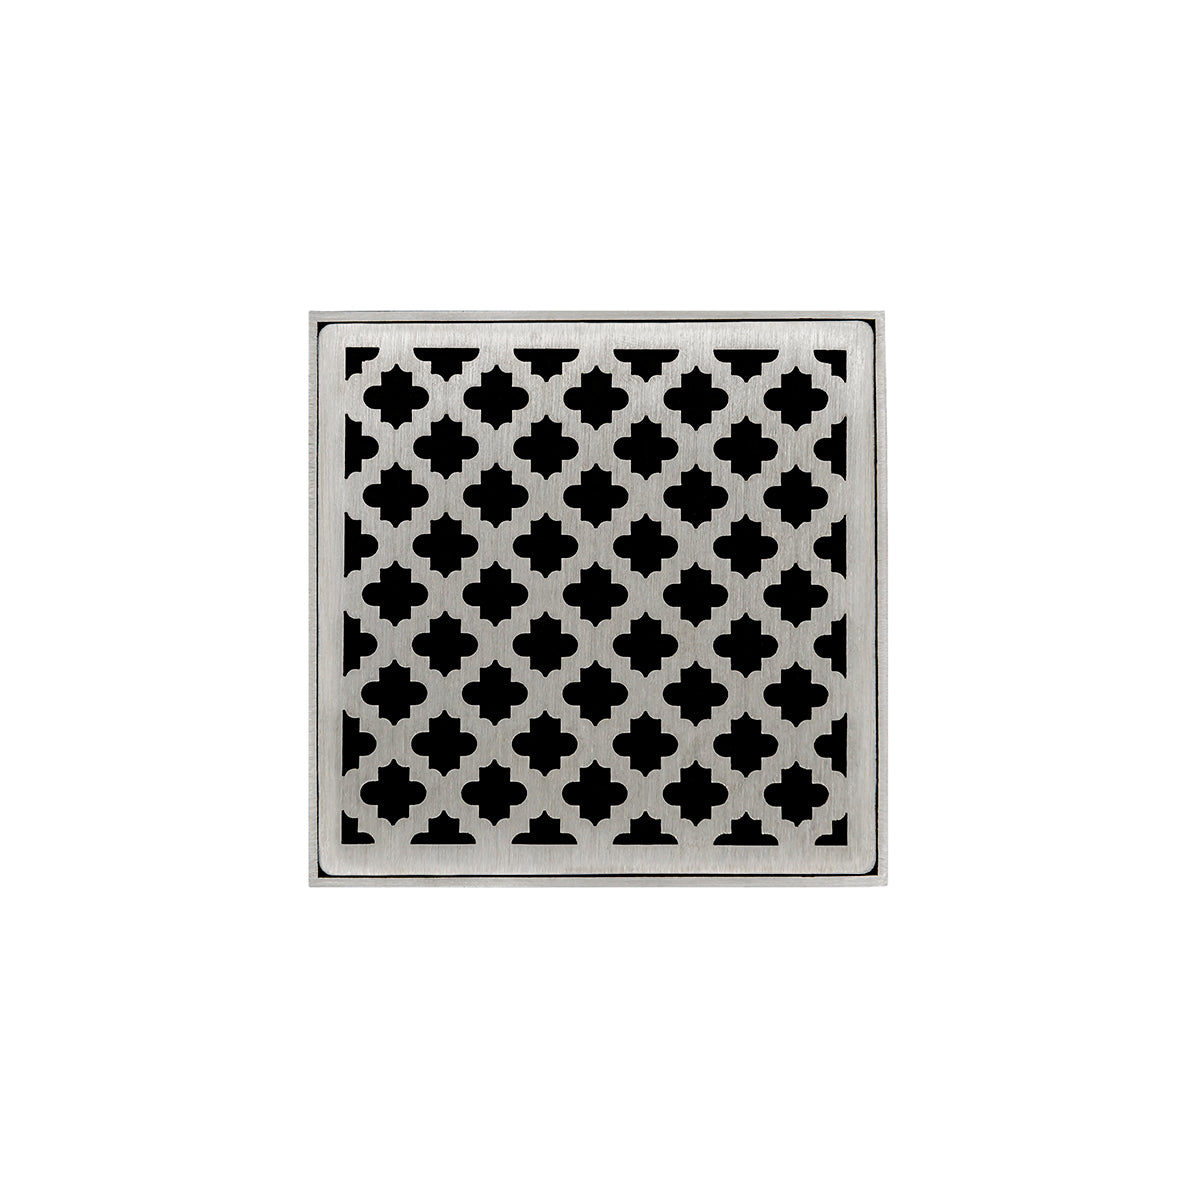 Infinity Drain 5" x 5" MD 5 Premium Center Drain Kit with Moor Pattern Decorative Plate with Cast Iron Drain Body, 2" Outlet